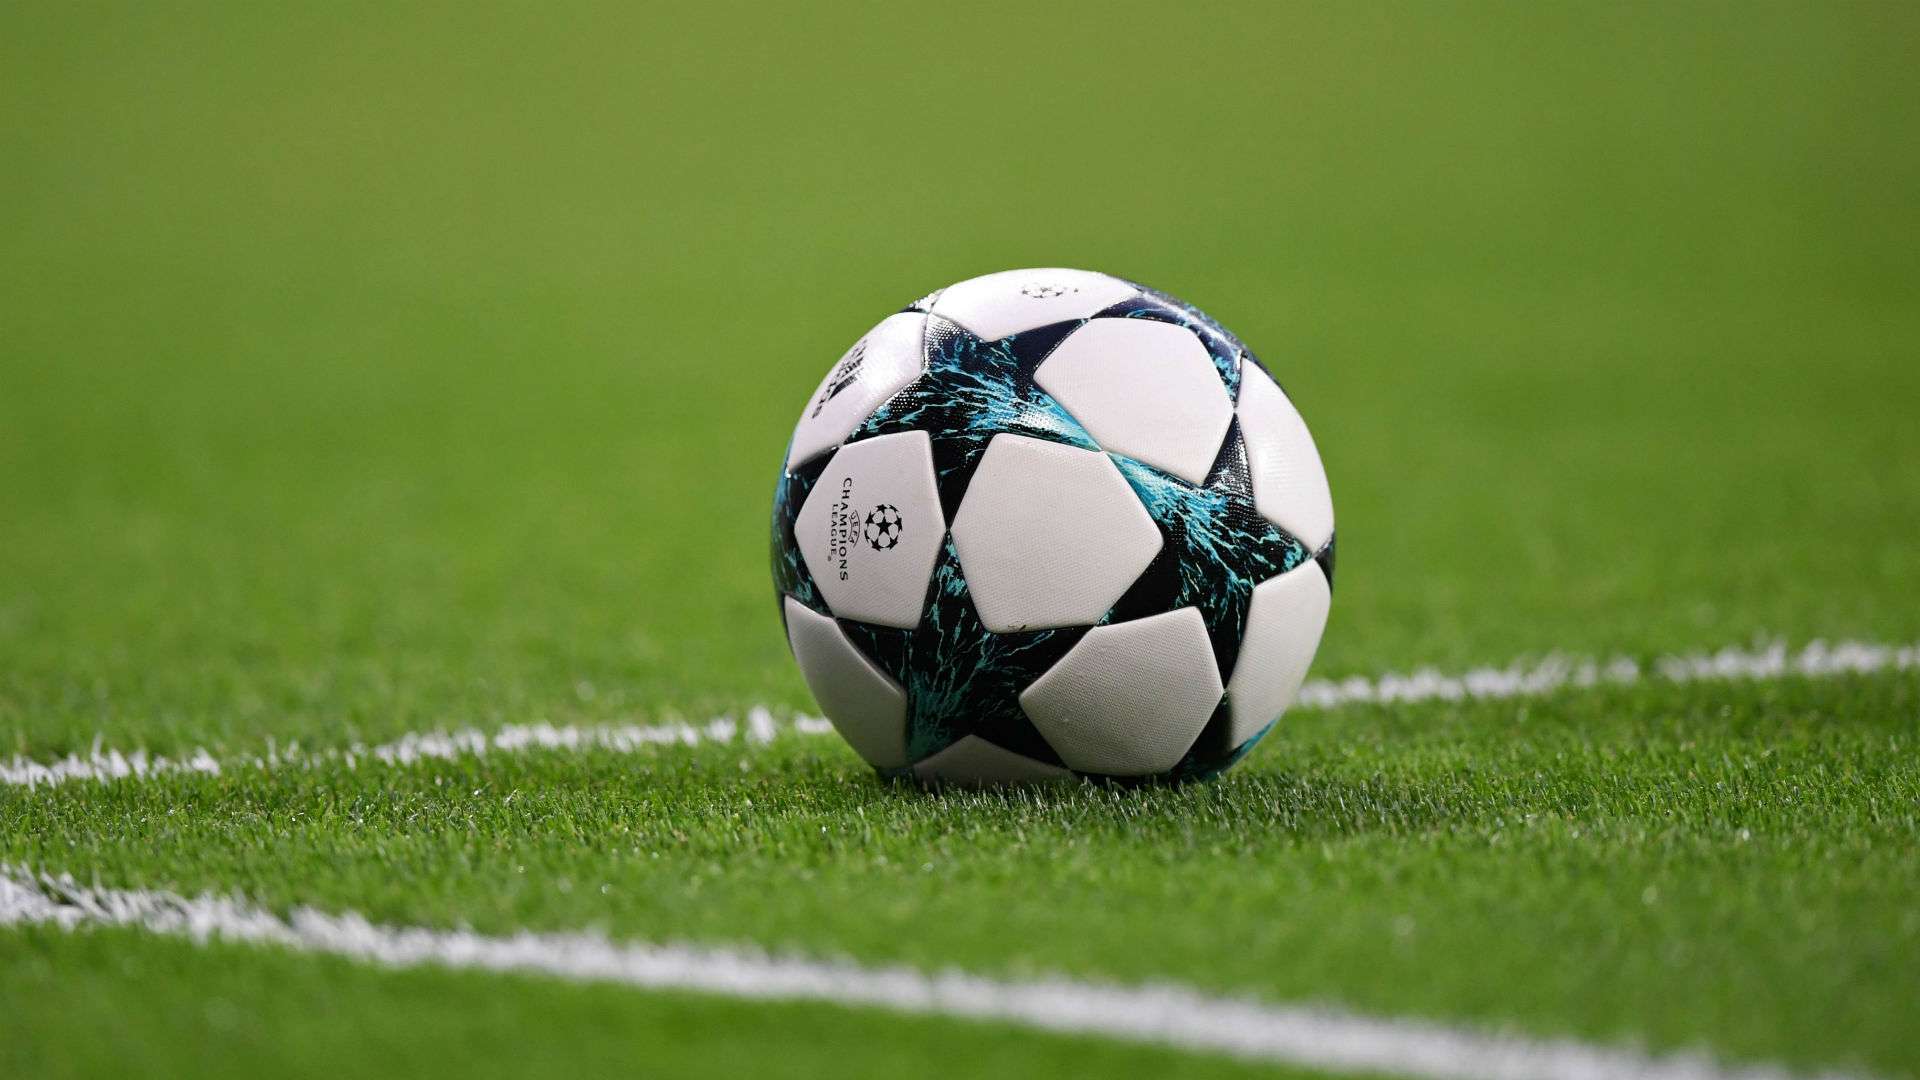 What Is The Official Champions League Ball For 2018 19 & How Much Does It Cost?